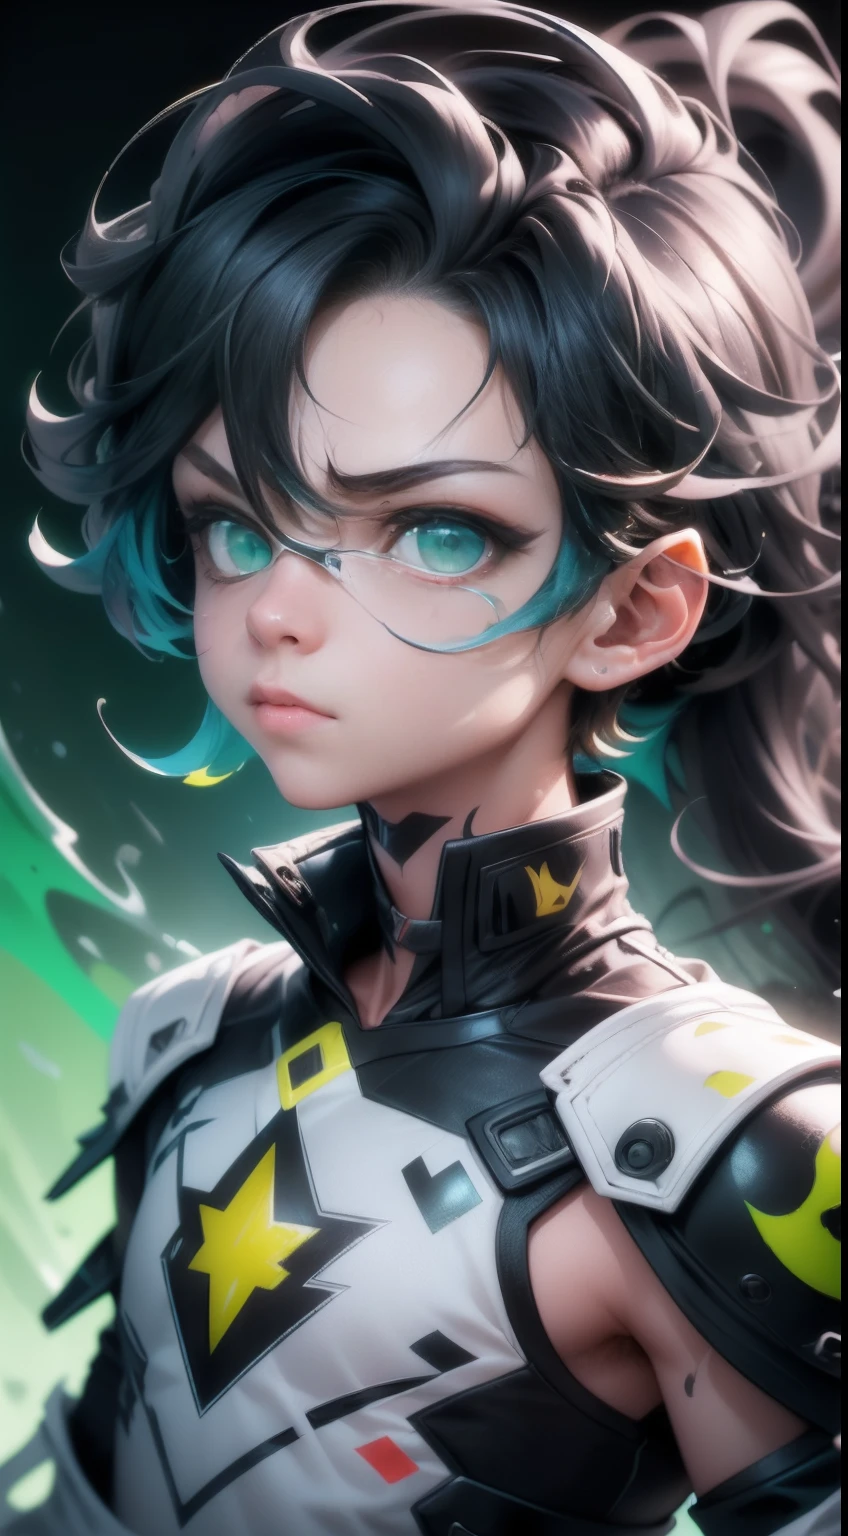 A boy, Thin and angular, with small nose，The chin is sharp, There is a faint scar on the chin, black messy hair, bright green eyes, A distinctive lightning-like scar on the forehead, Stylish, Maximalism, Full portrait, Covered in splashes, Splash color, vibrant, 8K, Artem Cheboka style, Watercolor on white background